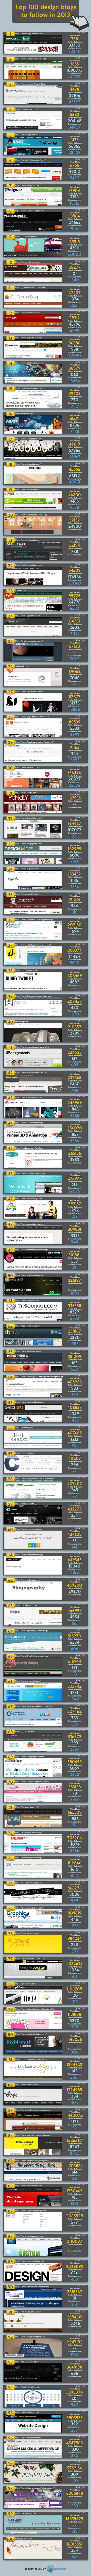 top 100 design blog to follow in 2013